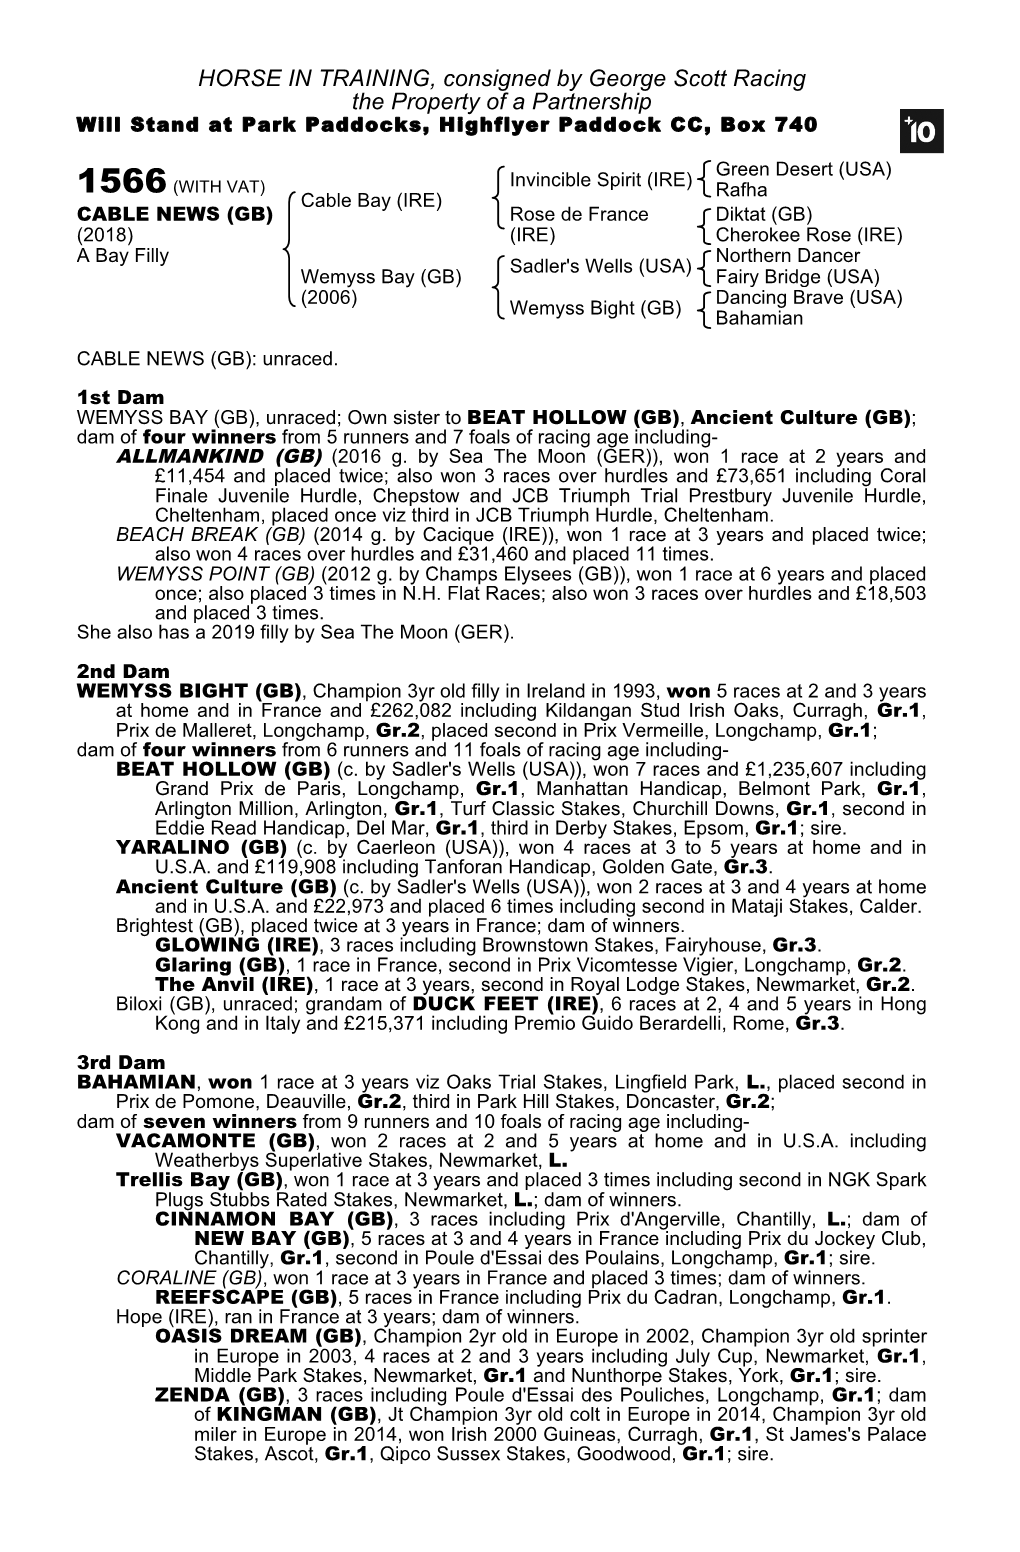 HORSE in TRAINING, Consigned by George Scott Racing the Property of a Partnership Will Stand at Park Paddocks, Highflyer Paddock CC, Box 740